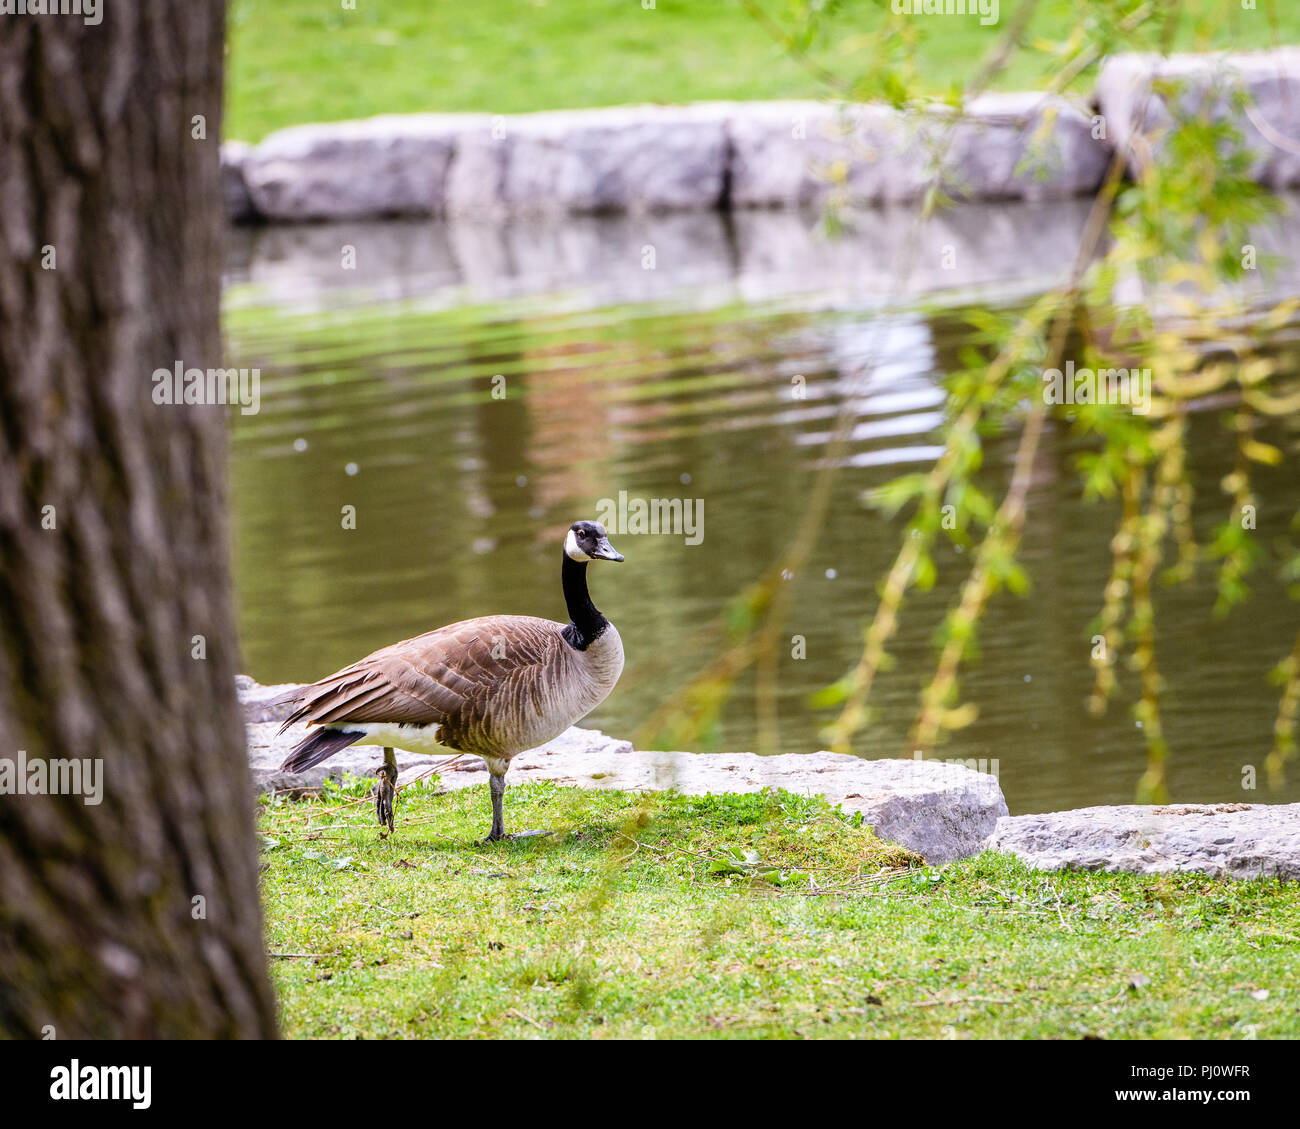 Canada Goose Standing Alone Near Pond and Tree Stock Photo